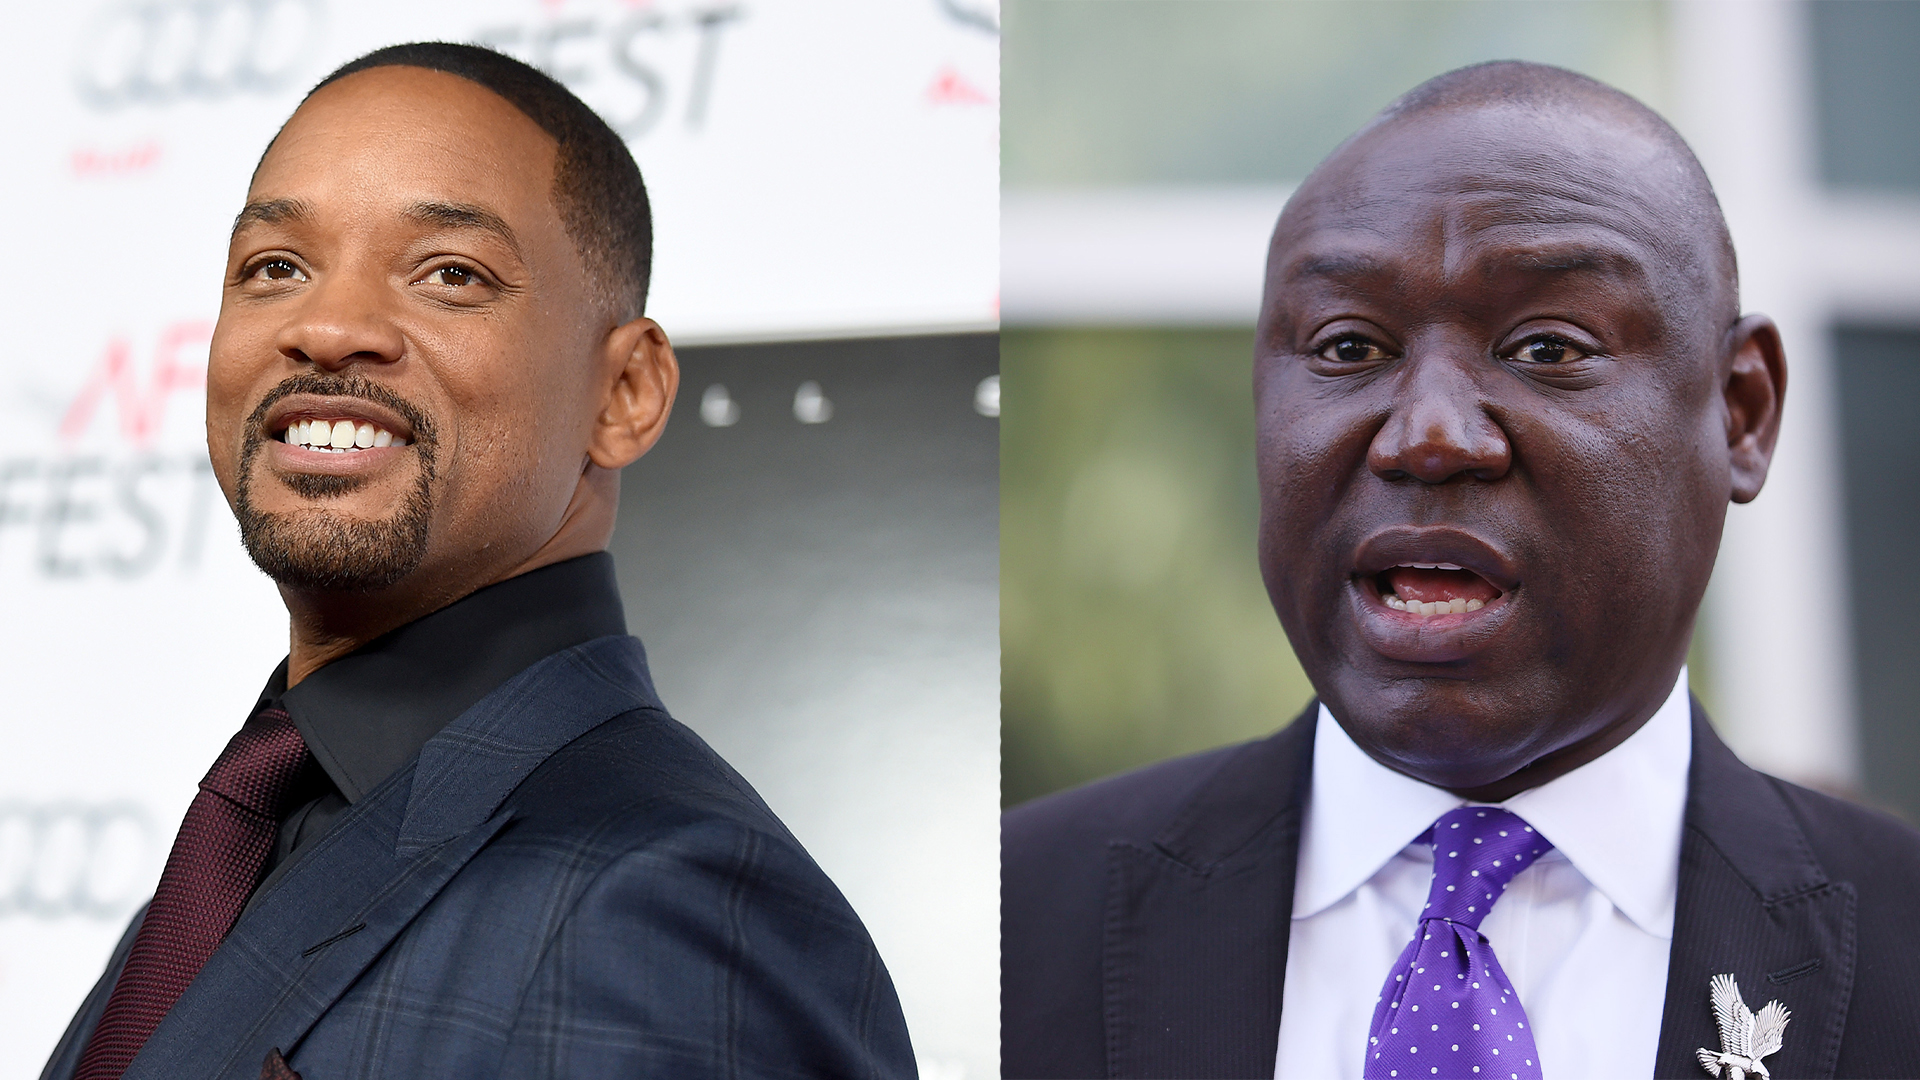 Will Smith, T.D. Jakes And George Clinton Raise $10M For Benjamin Crump's Law School